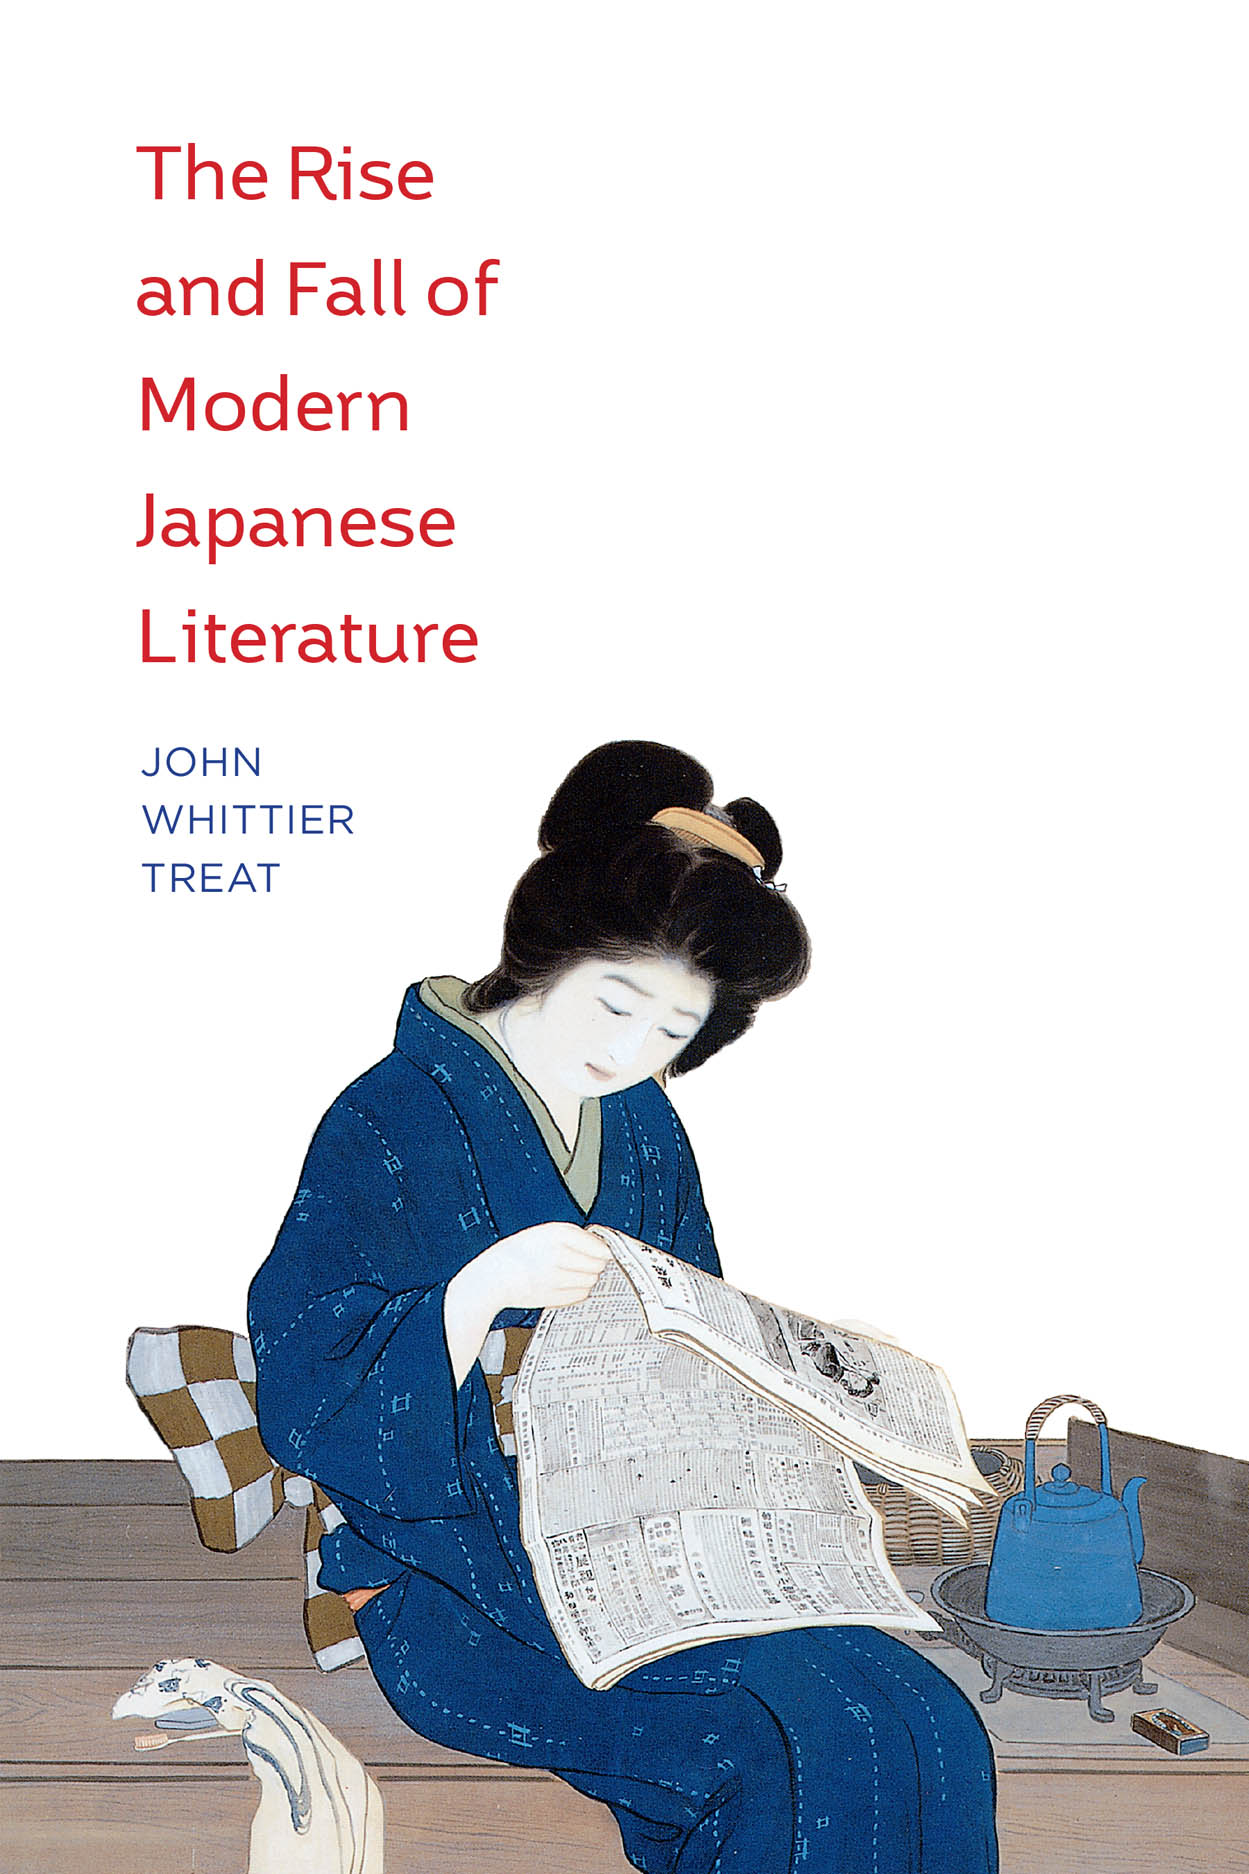 The Rise and Fall of Modern Japanese Literature, Treat